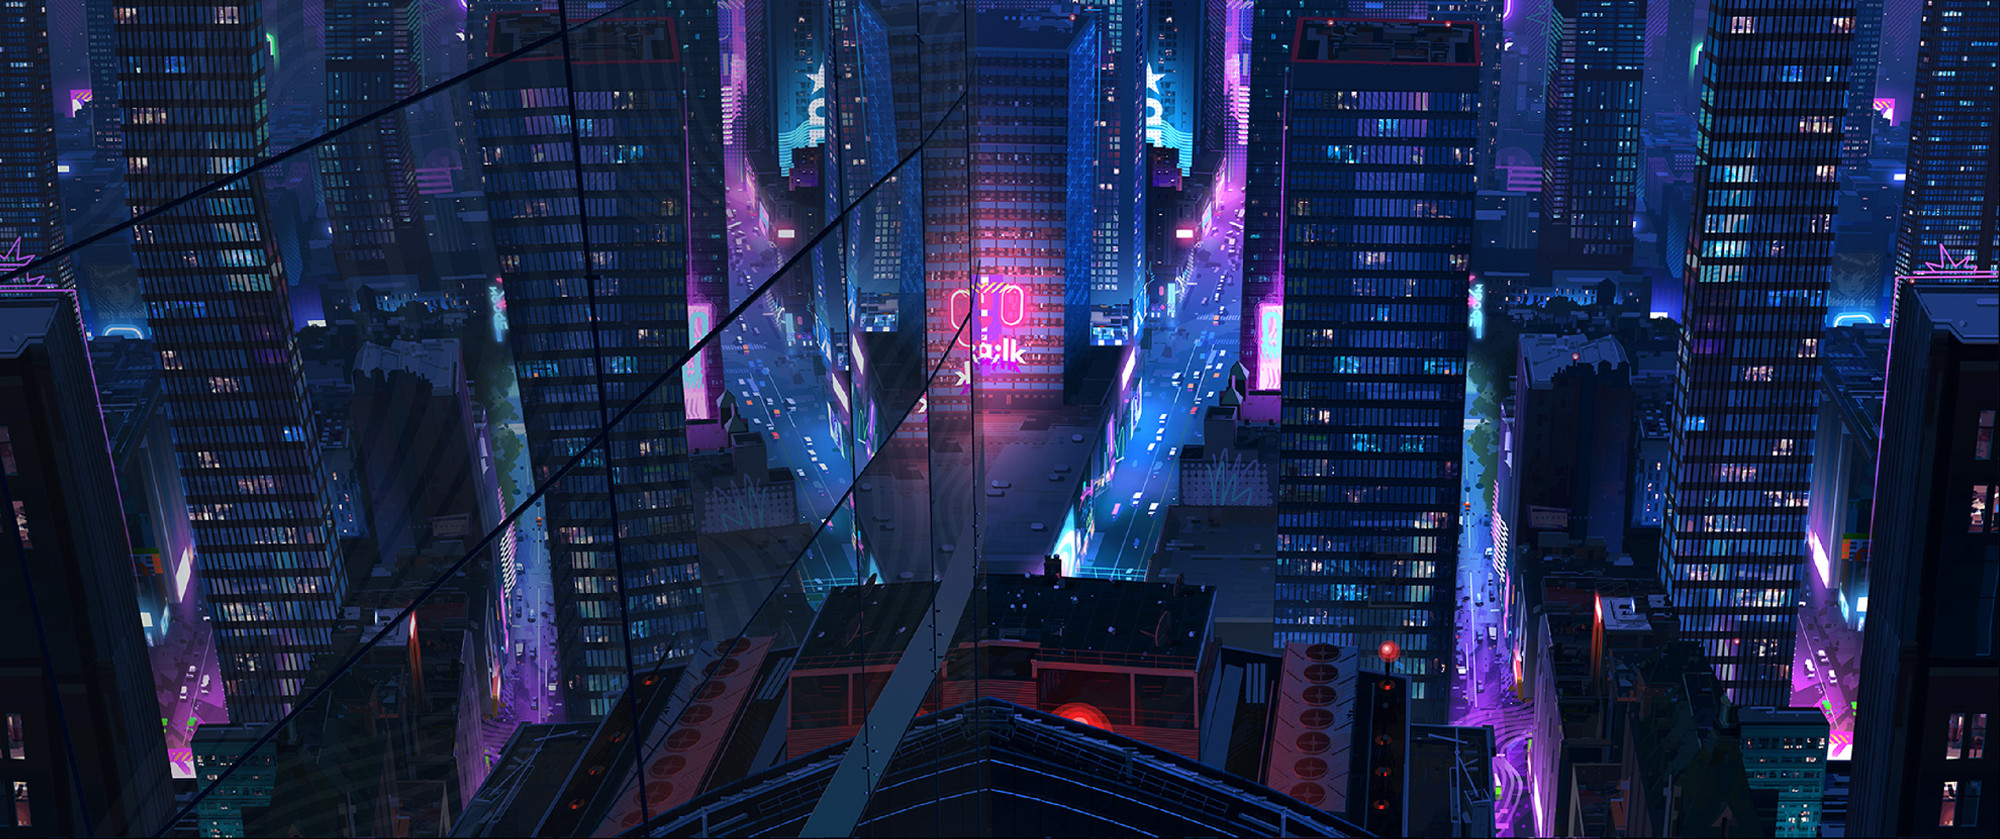 'Spider Man' : Across the Spider-Verse
Matte Painting